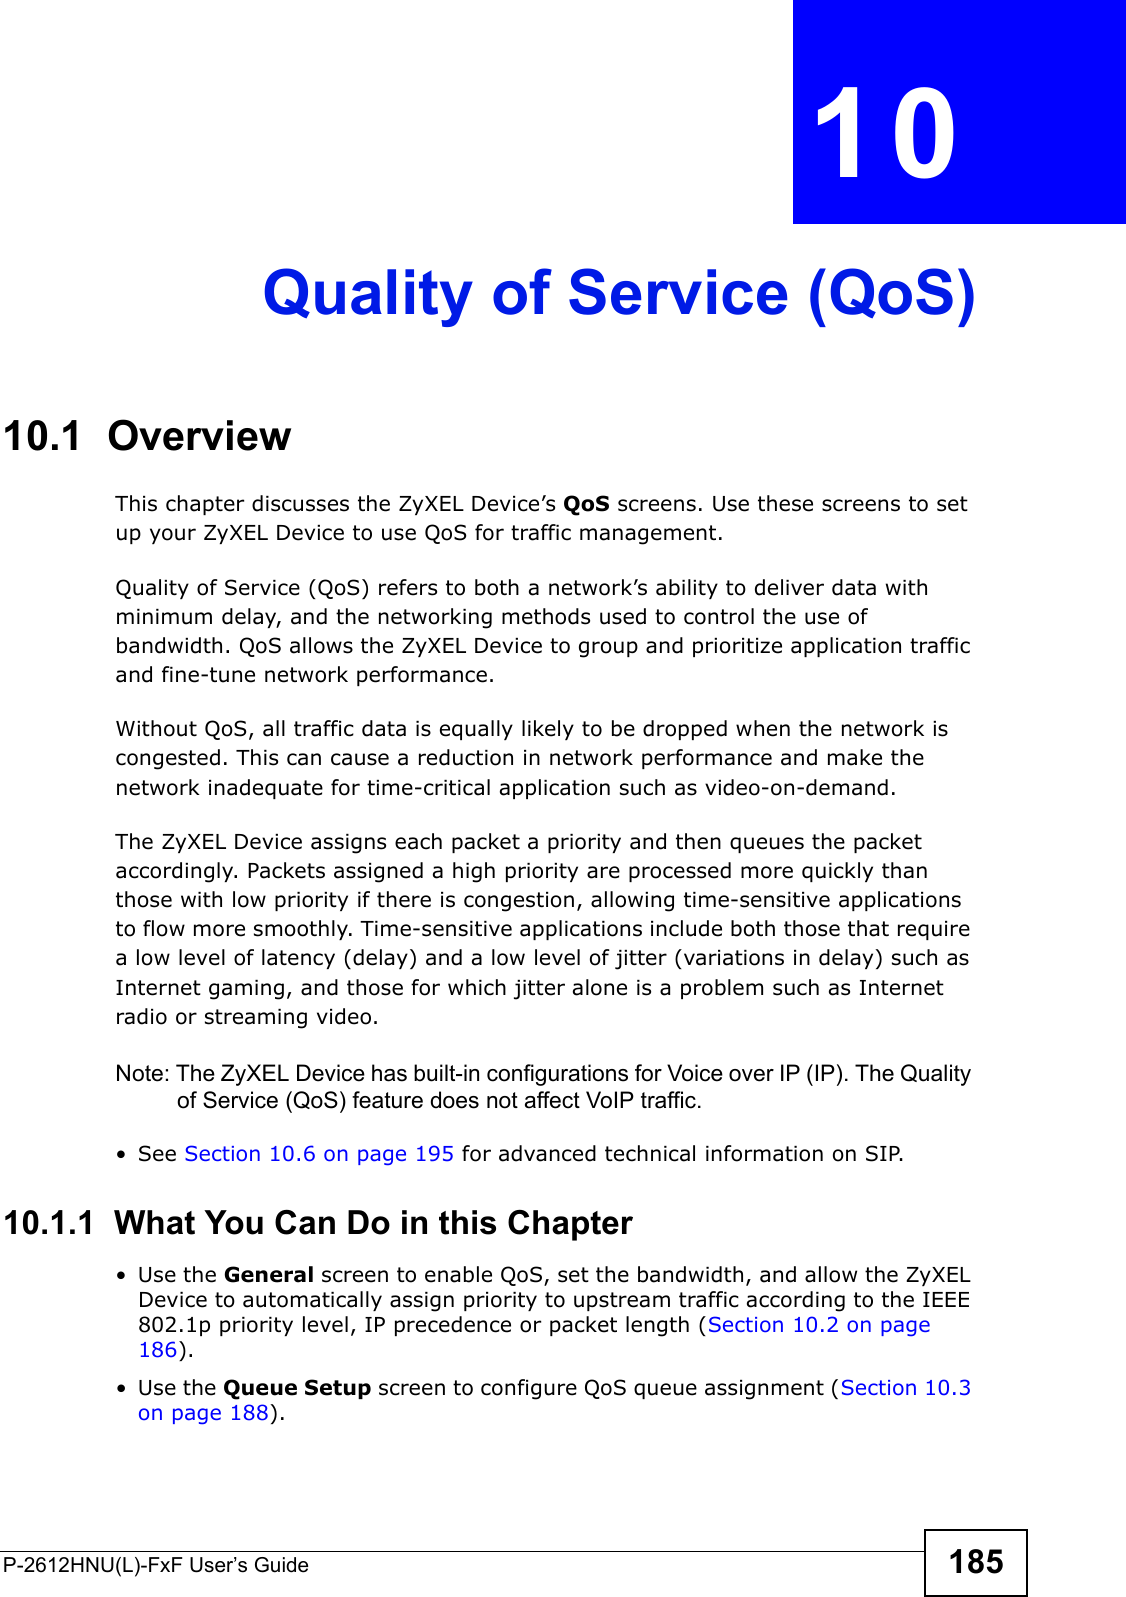 P-2612HNU(L)-FxF User’s Guide 185CHAPTER   10 Quality of Service (QoS)10.1  OverviewThis chapter discusses the ZyXEL Device’s QoS screens. Use these screens to set up your ZyXEL Device to use QoS for traffic management. Quality of Service (QoS) refers to both a network’s ability to deliver data with minimum delay, and the networking methods used to control the use ofbandwidth. QoS allows the ZyXEL Device to group and prioritize application traffic and fine-tune network performance.Without QoS, all traffic data is equally likely to be dropped when the network iscongested. This can cause a reduction in network performance and make thenetwork inadequate for time-critical application such as video-on-demand.The ZyXEL Device assigns each packet a priority and then queues the packet accordingly. Packets assigned a high priority are processed more quickly than those with low priority if there is congestion, allowing time-sensitive applications to flow more smoothly. Time-sensitive applications include both those that require a low level of latency (delay) and a low level of jitter (variations in delay) such asInternet gaming, and those for which jitter alone is a problem such as Internet radio or streaming video.Note: The ZyXEL Device has built-in configurations for Voice over IP (IP). The Quality of Service (QoS) feature does not affect VoIP traffic.  • See Section 10.6 on page 195 for advanced technical information on SIP.10.1.1  What You Can Do in this Chapter• Use the General screen to enable QoS, set the bandwidth, and allow the ZyXEL Device to automatically assign priority to upstream traffic according to the IEEE 802.1p priority level, IP precedence or packet length (Section 10.2 on page 186).• Use the Queue Setup screen to configure QoS queue assignment (Section 10.3 on page 188).